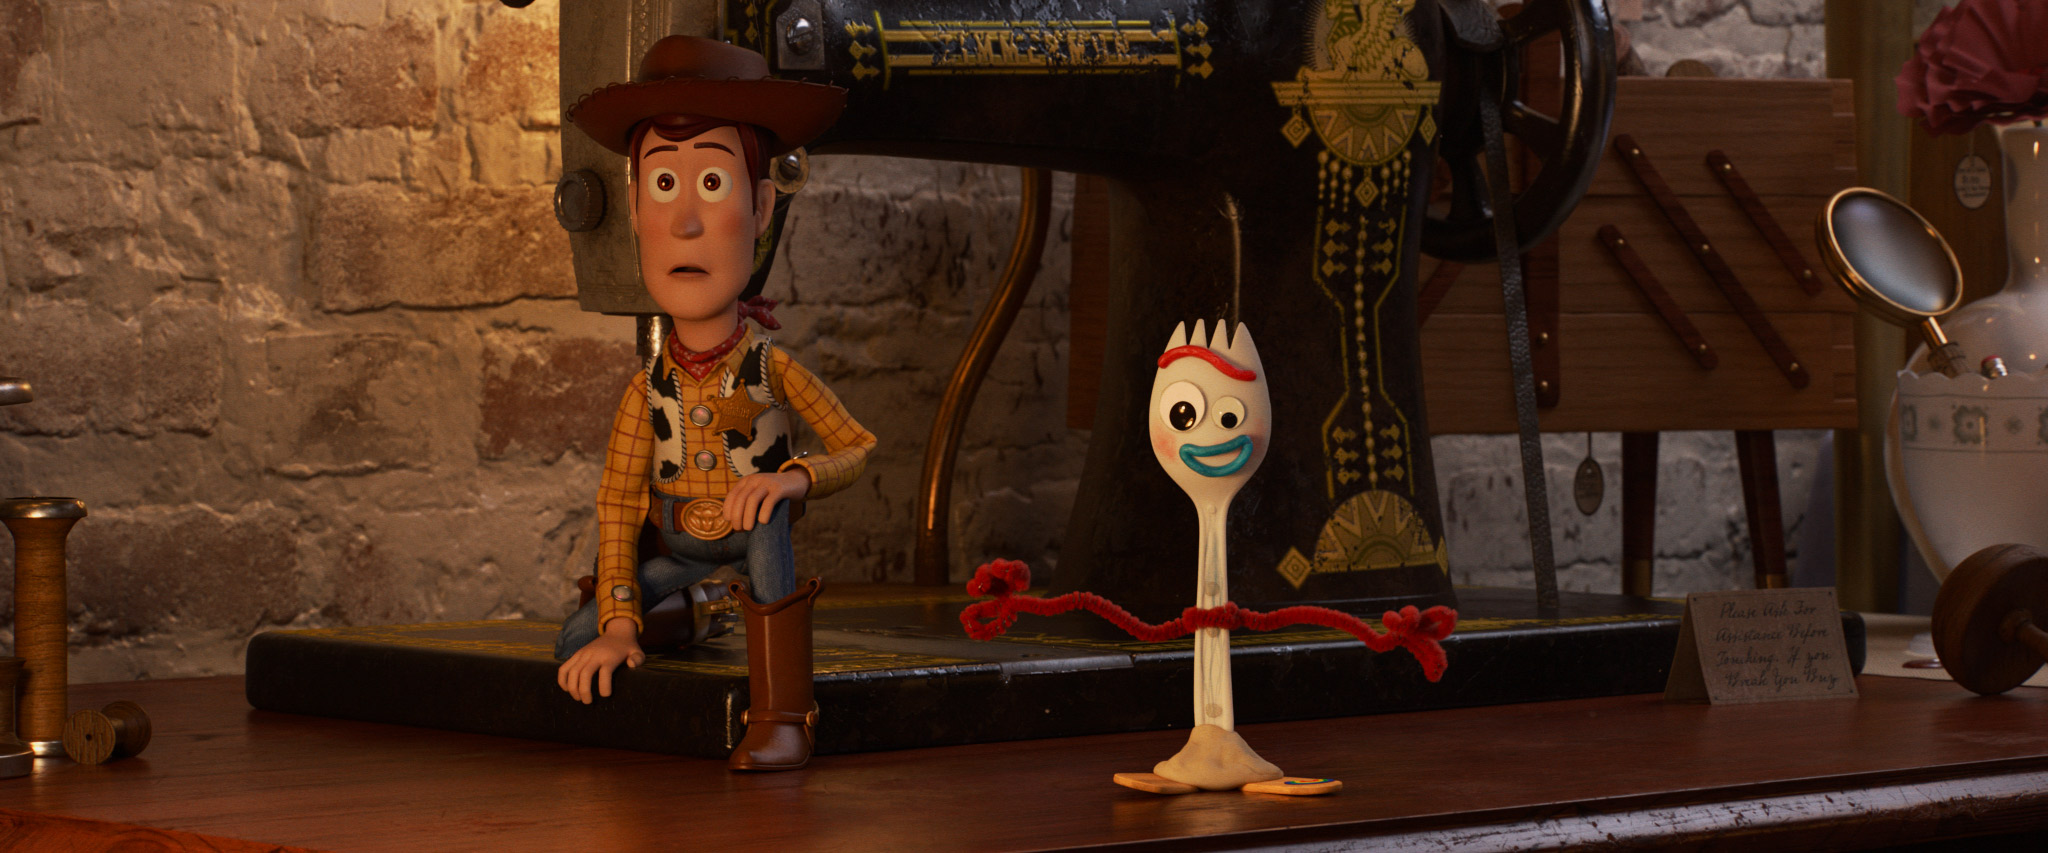 The Art of Toy Story 4